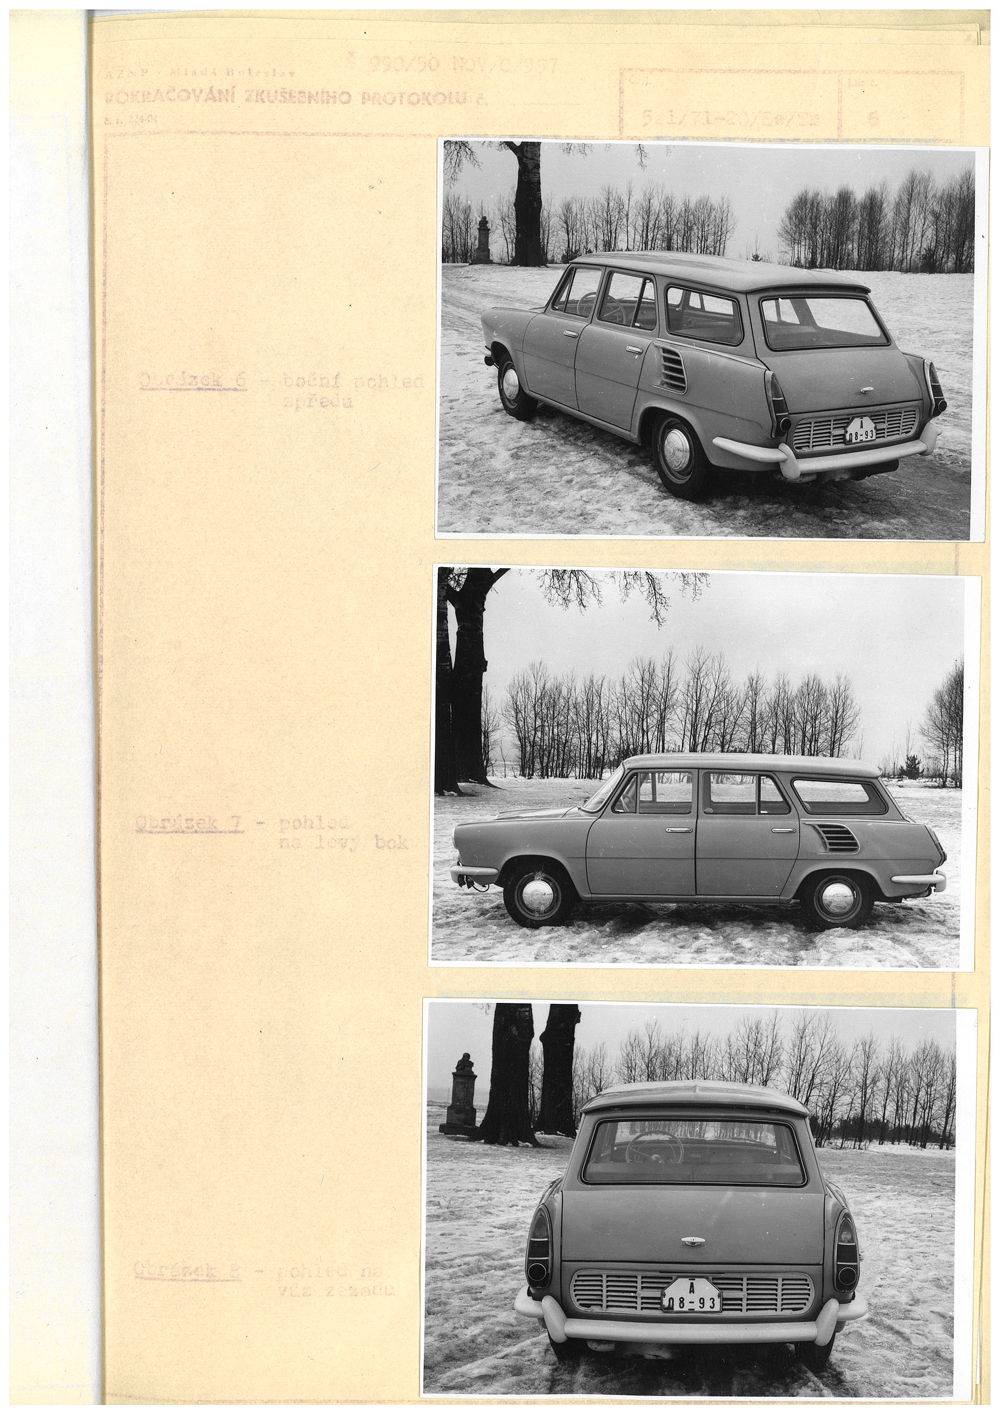 Starting at the end of May 1963, three-week tests were
carried out, but ultimately the team opted for the coupé
1000/1100 MBX without upper B-pillars. Production of
the OCTAVIA COMBI continued until 1971.